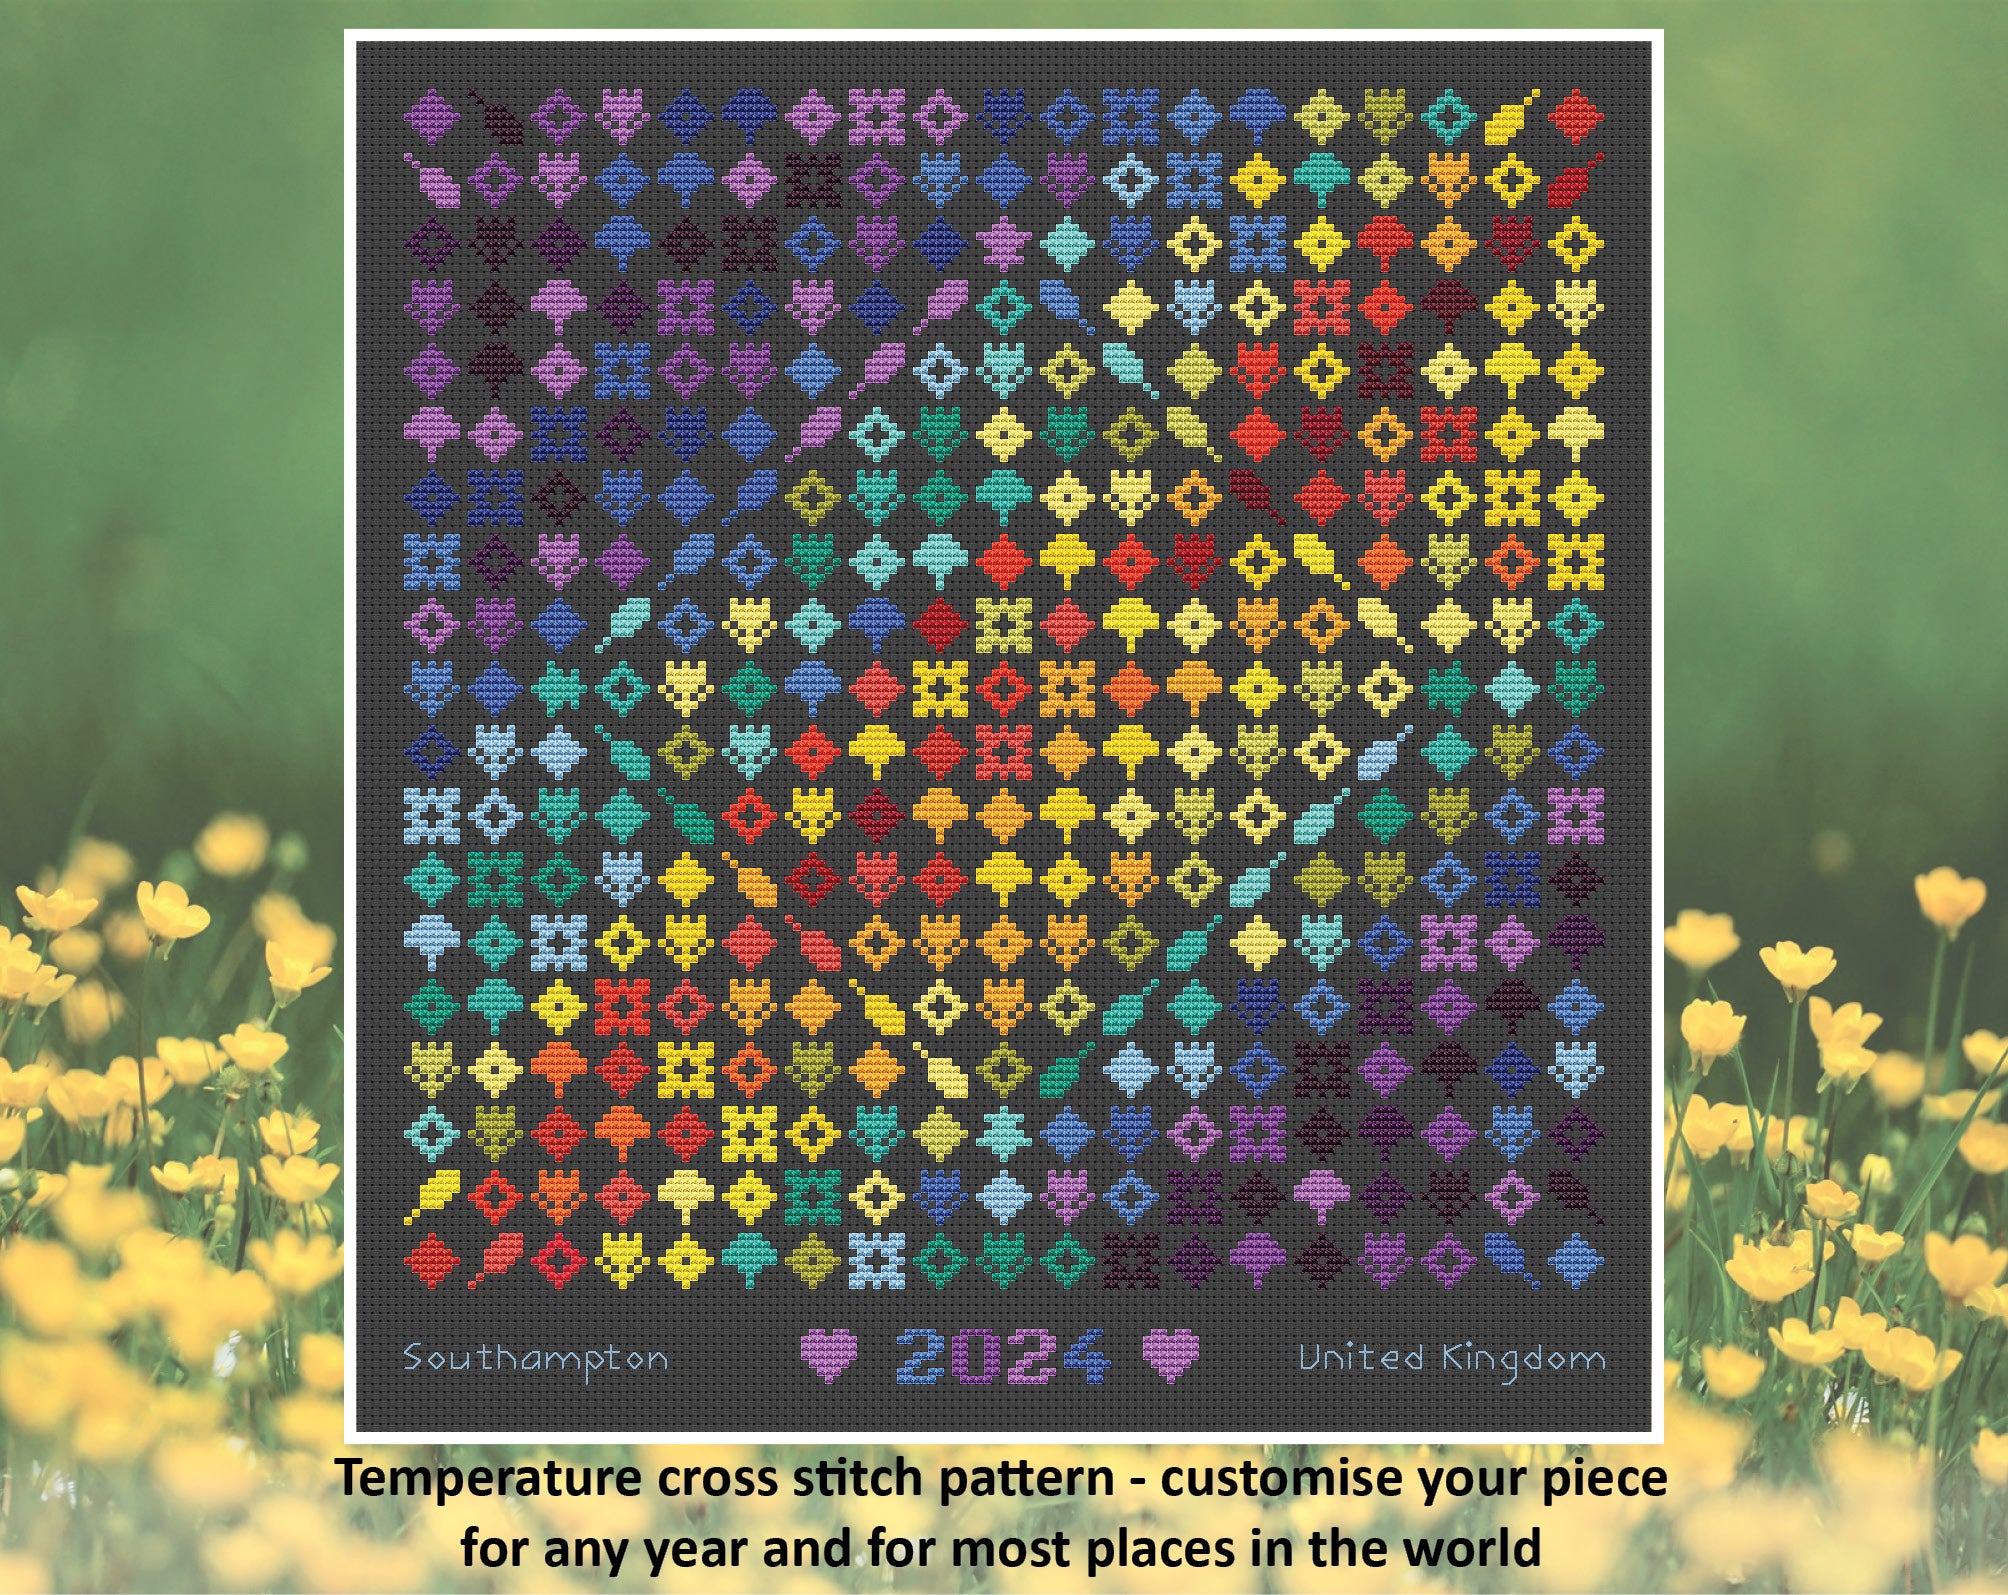 Rainbow Temperature Garden cross stitch pattern - maximum temperatures version. Customise your piece for any year and for most places in the world.